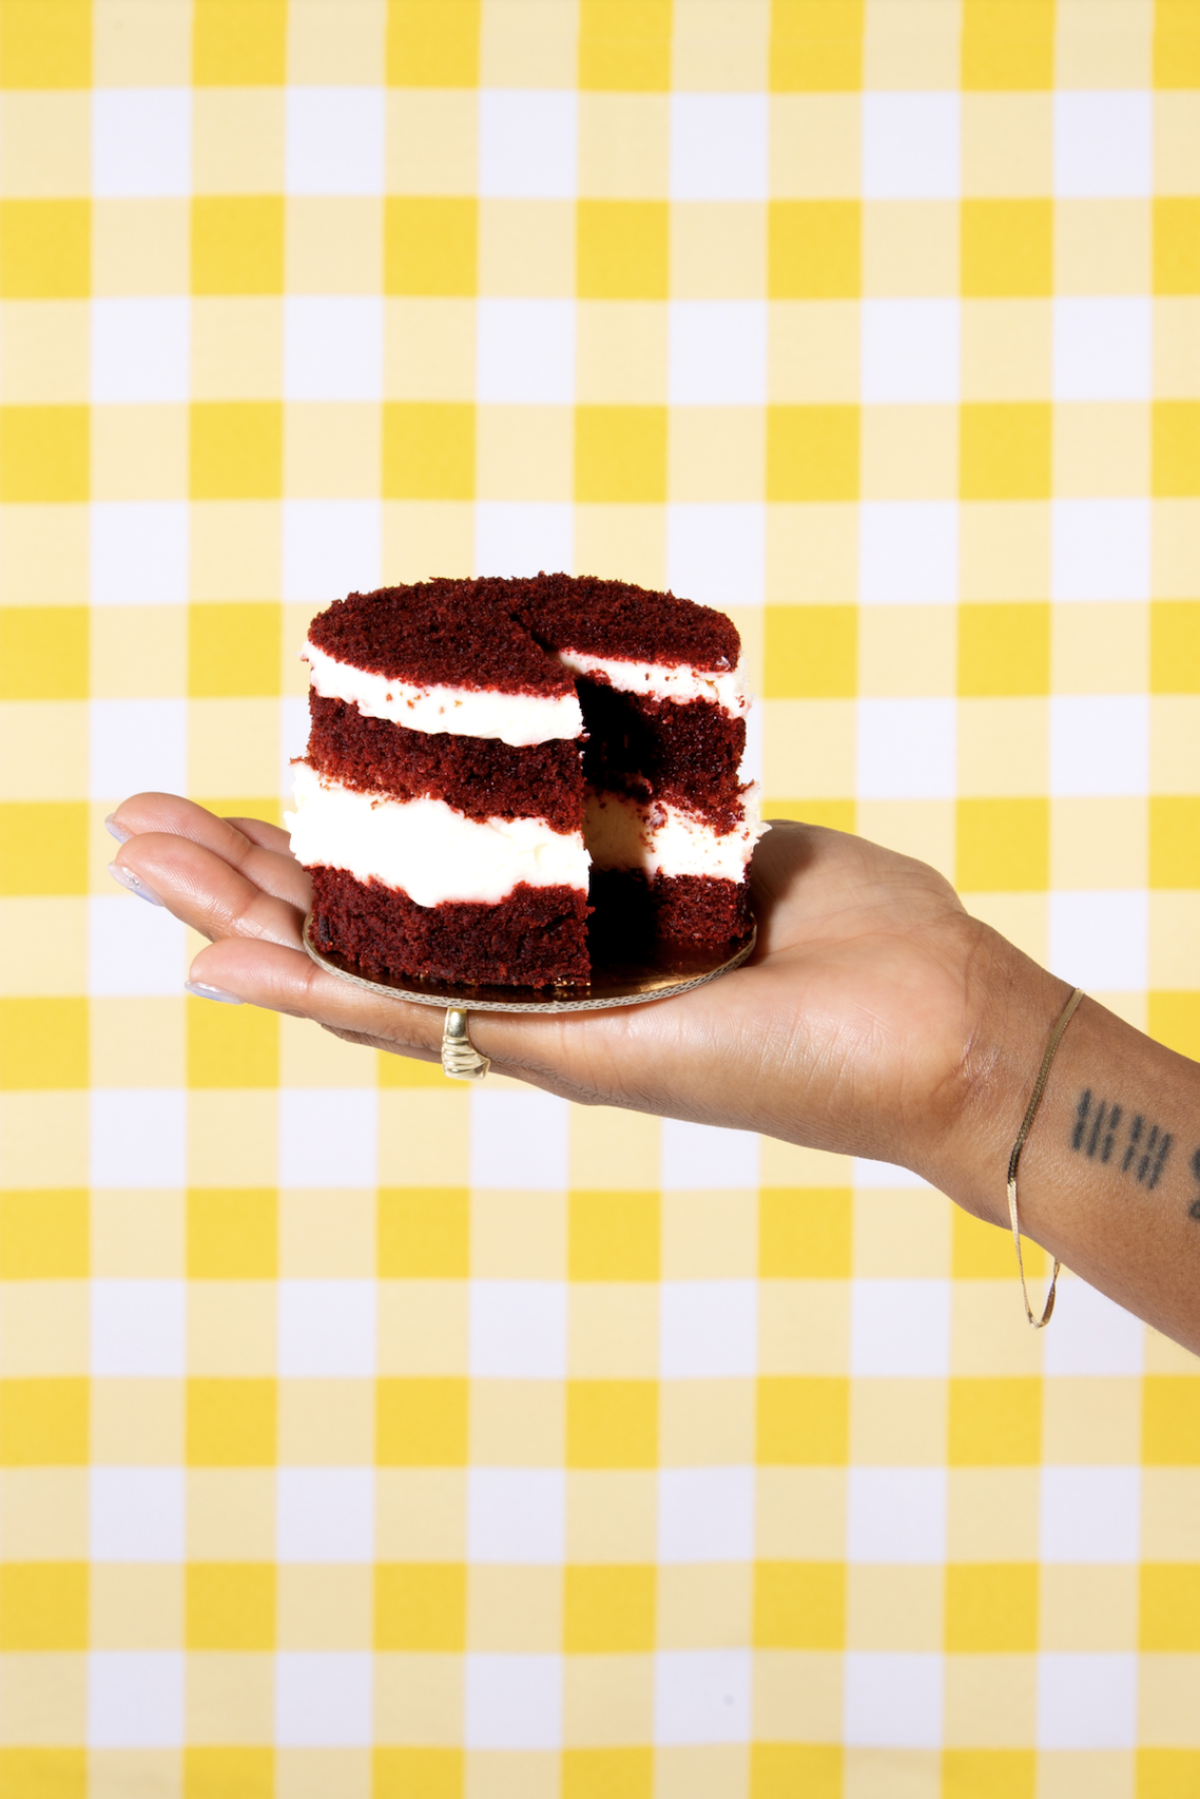 A small round red velvet cake, with a slice missing, in the palm of an upraised hand